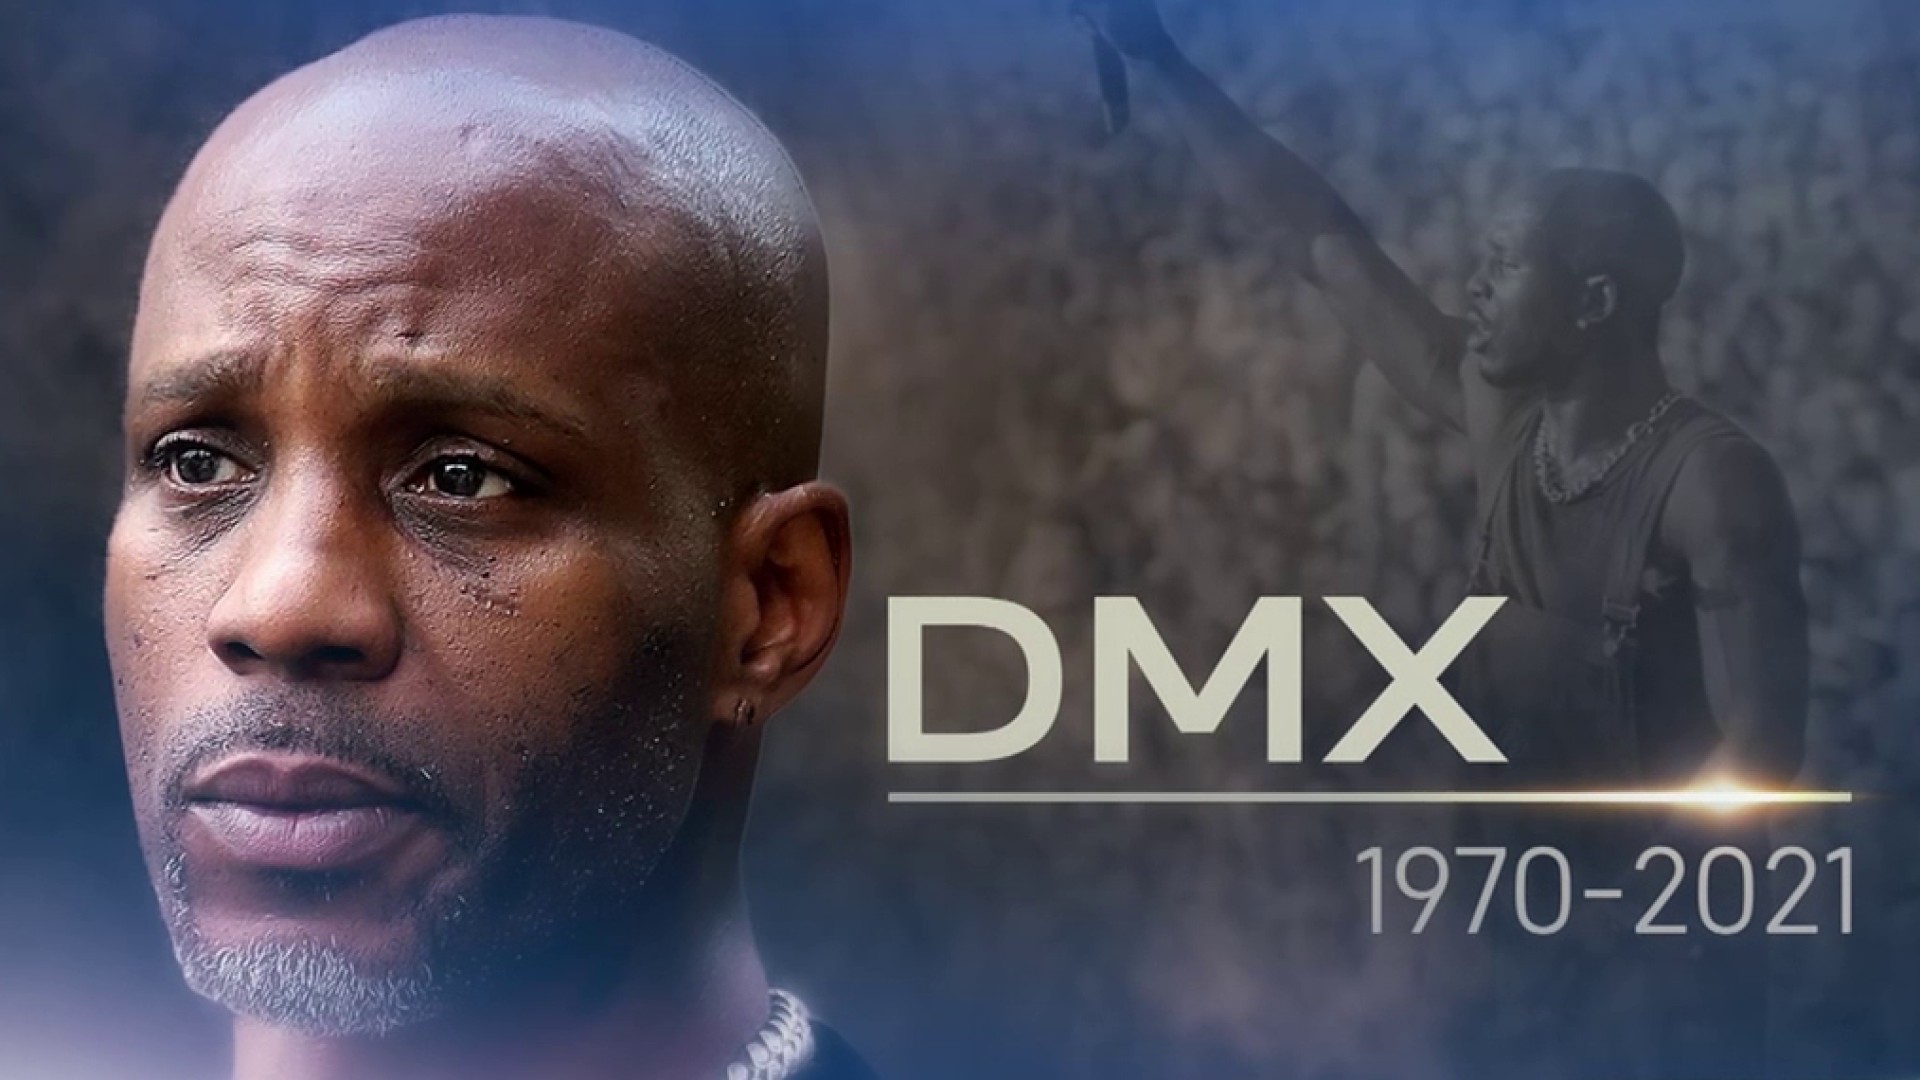 dmx albums by year